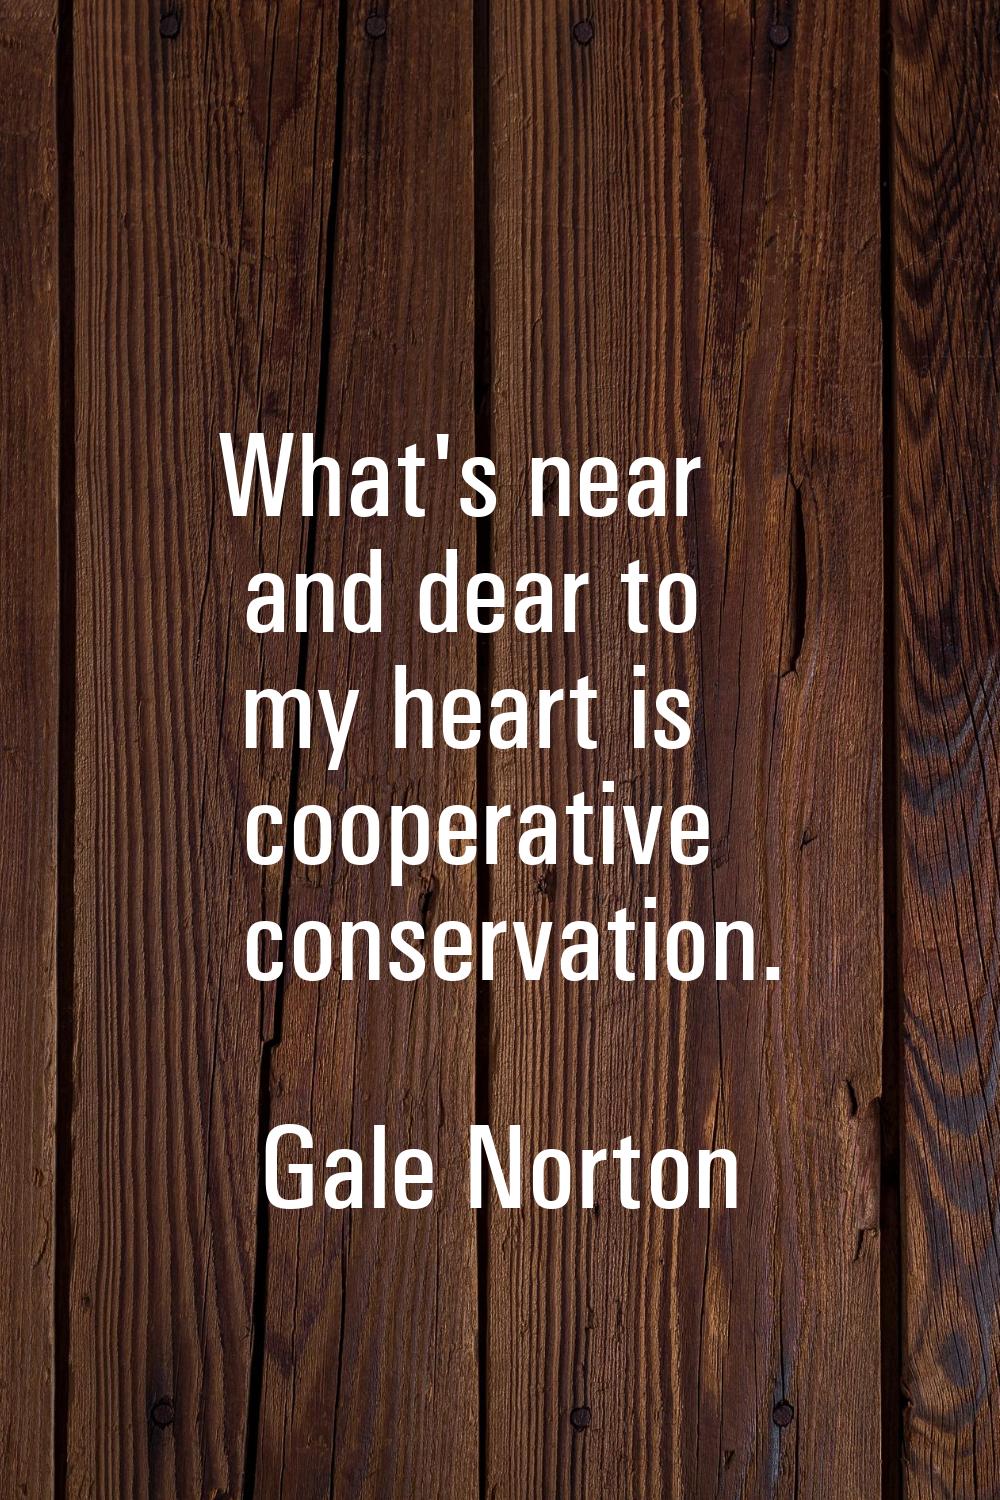 What's near and dear to my heart is cooperative conservation.